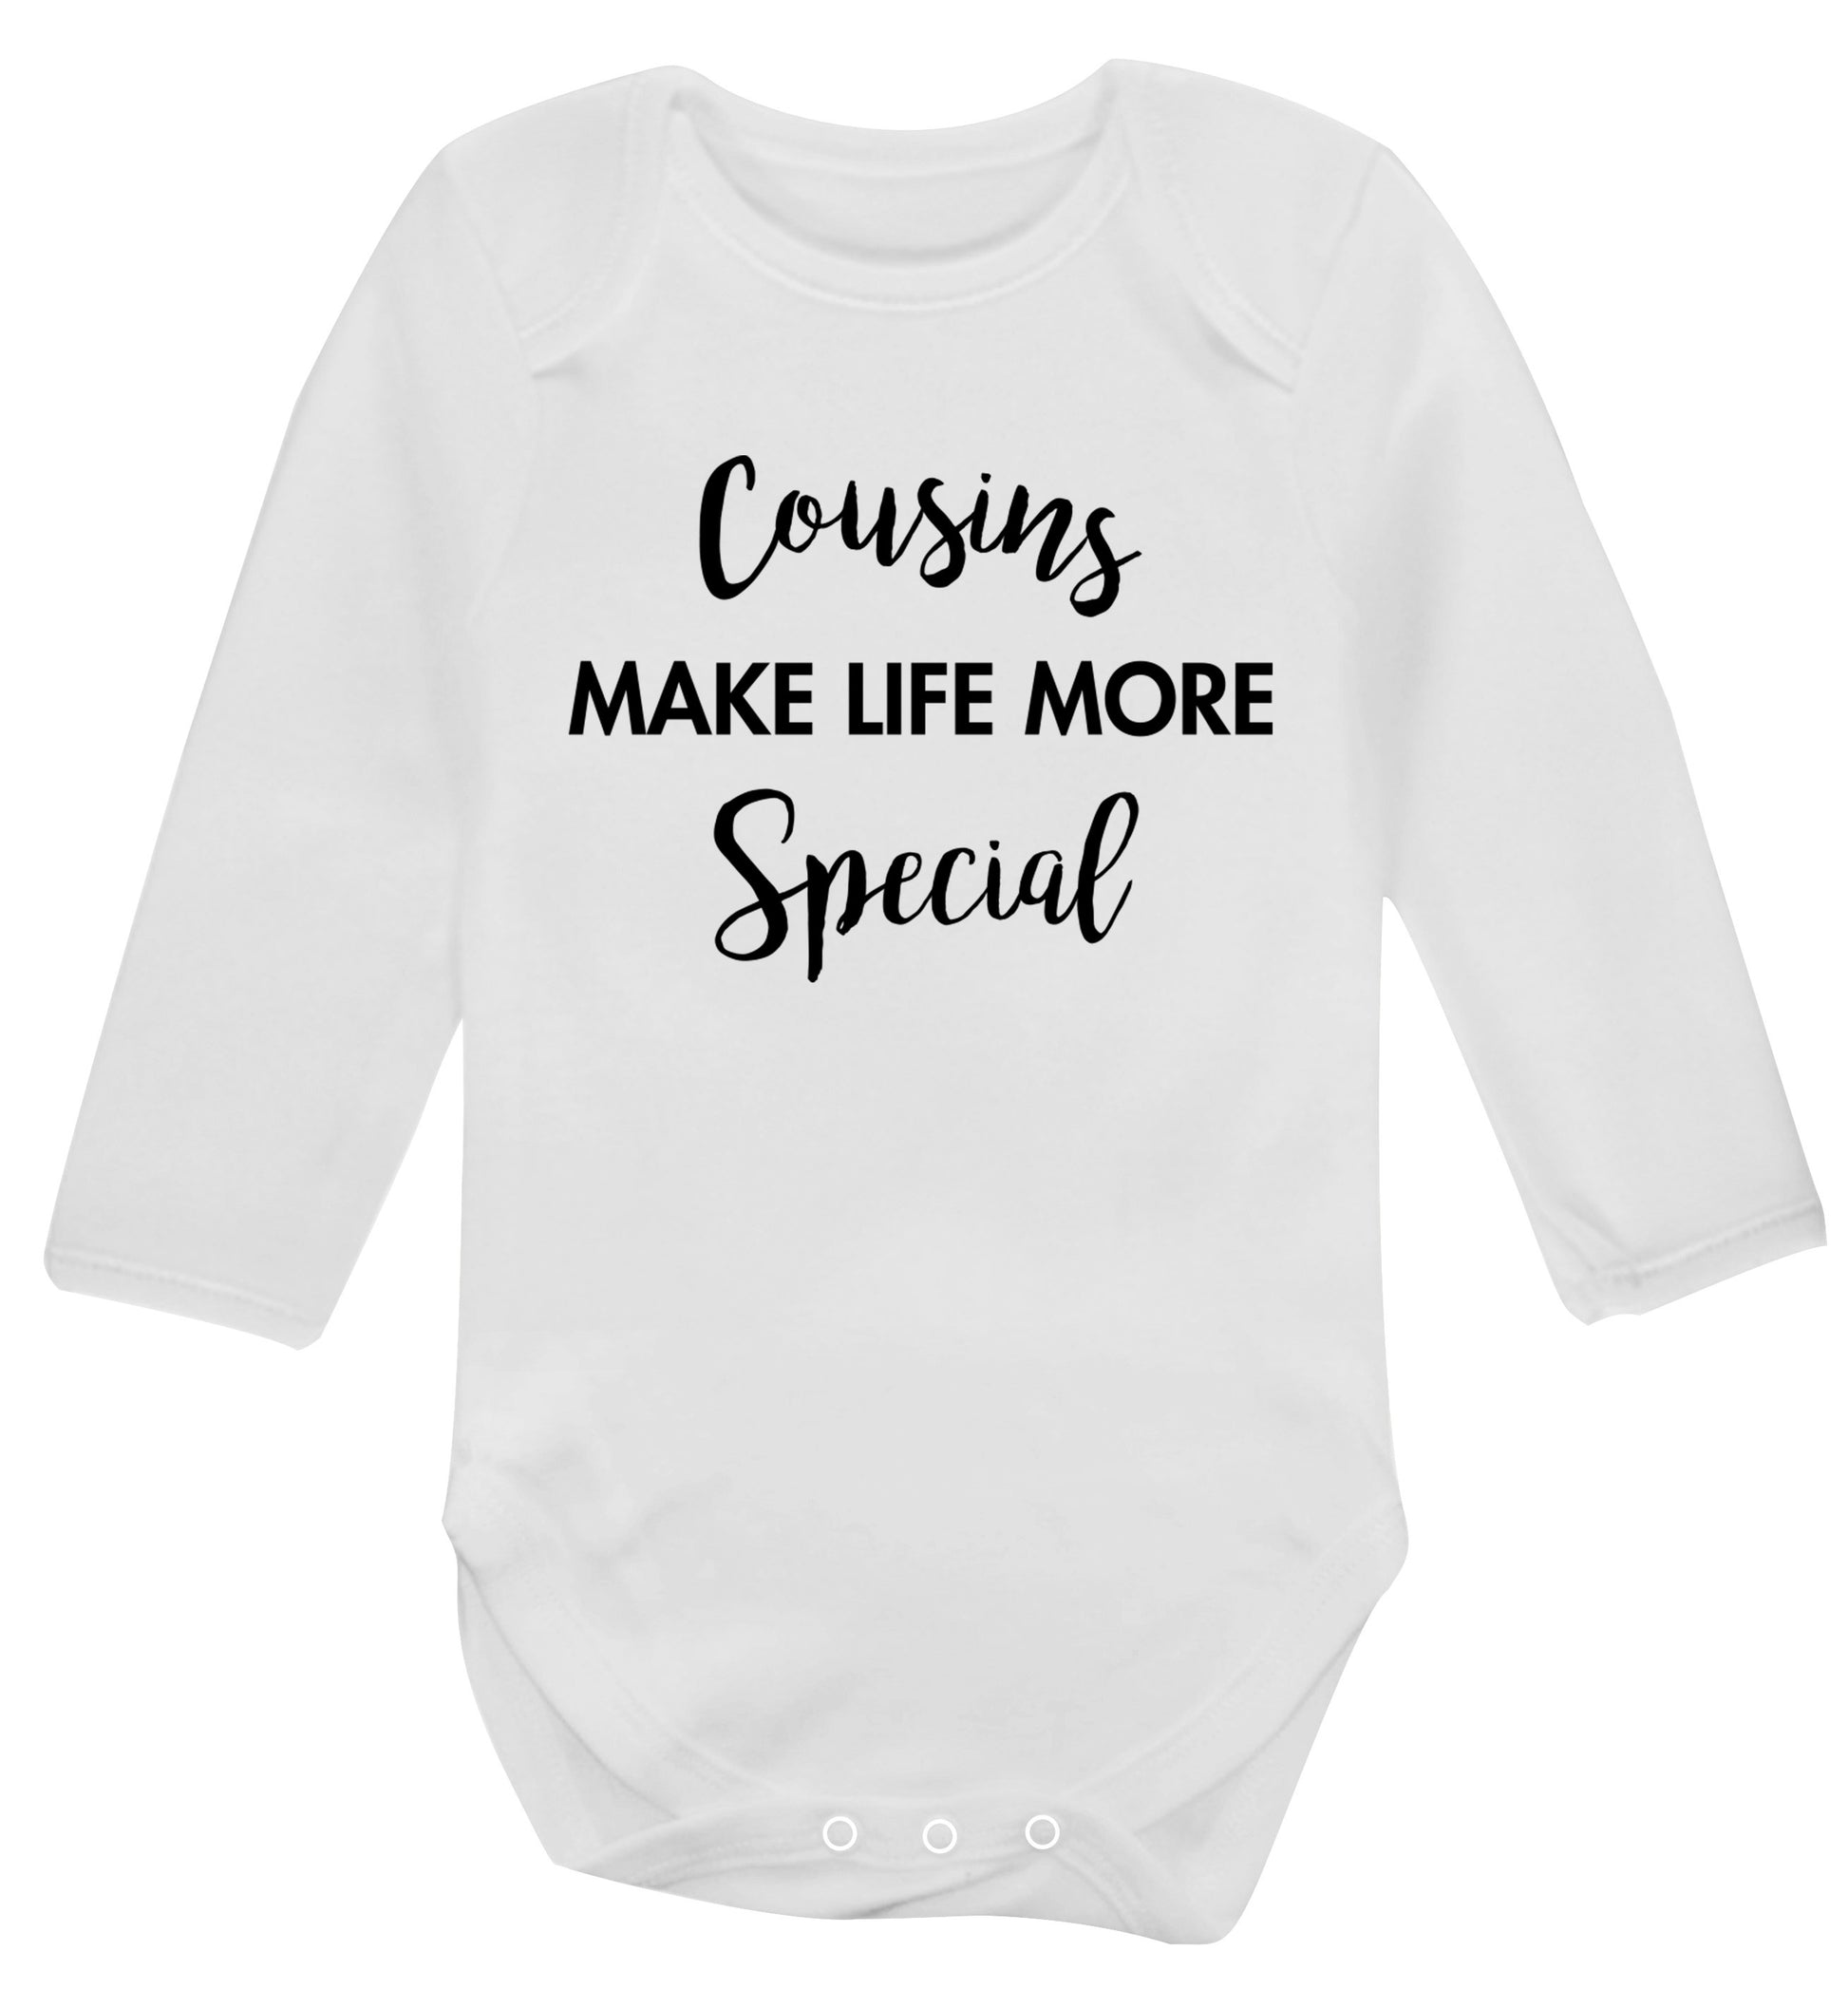 Cousins make life more special Baby Vest long sleeved white 6-12 months